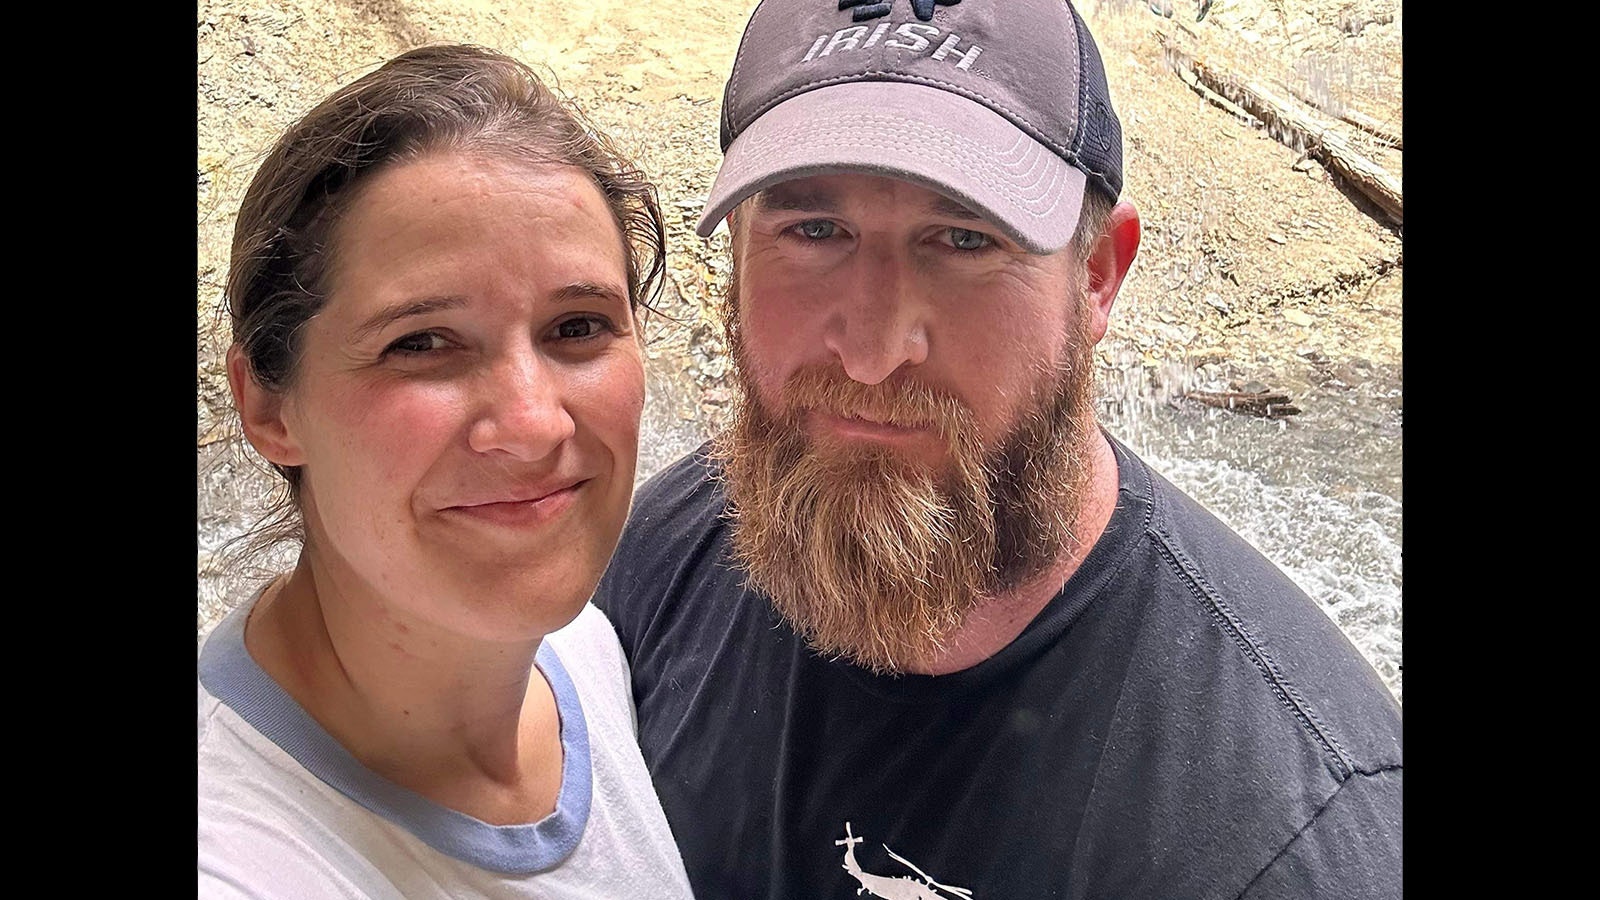 Sean and Ashley Willey of Rock Springs say that since they sued Sweetwater County School District No. 1 for allegedly gender transitioning their teen behind their backs that other local parents have told them they had similar experiences with the district.